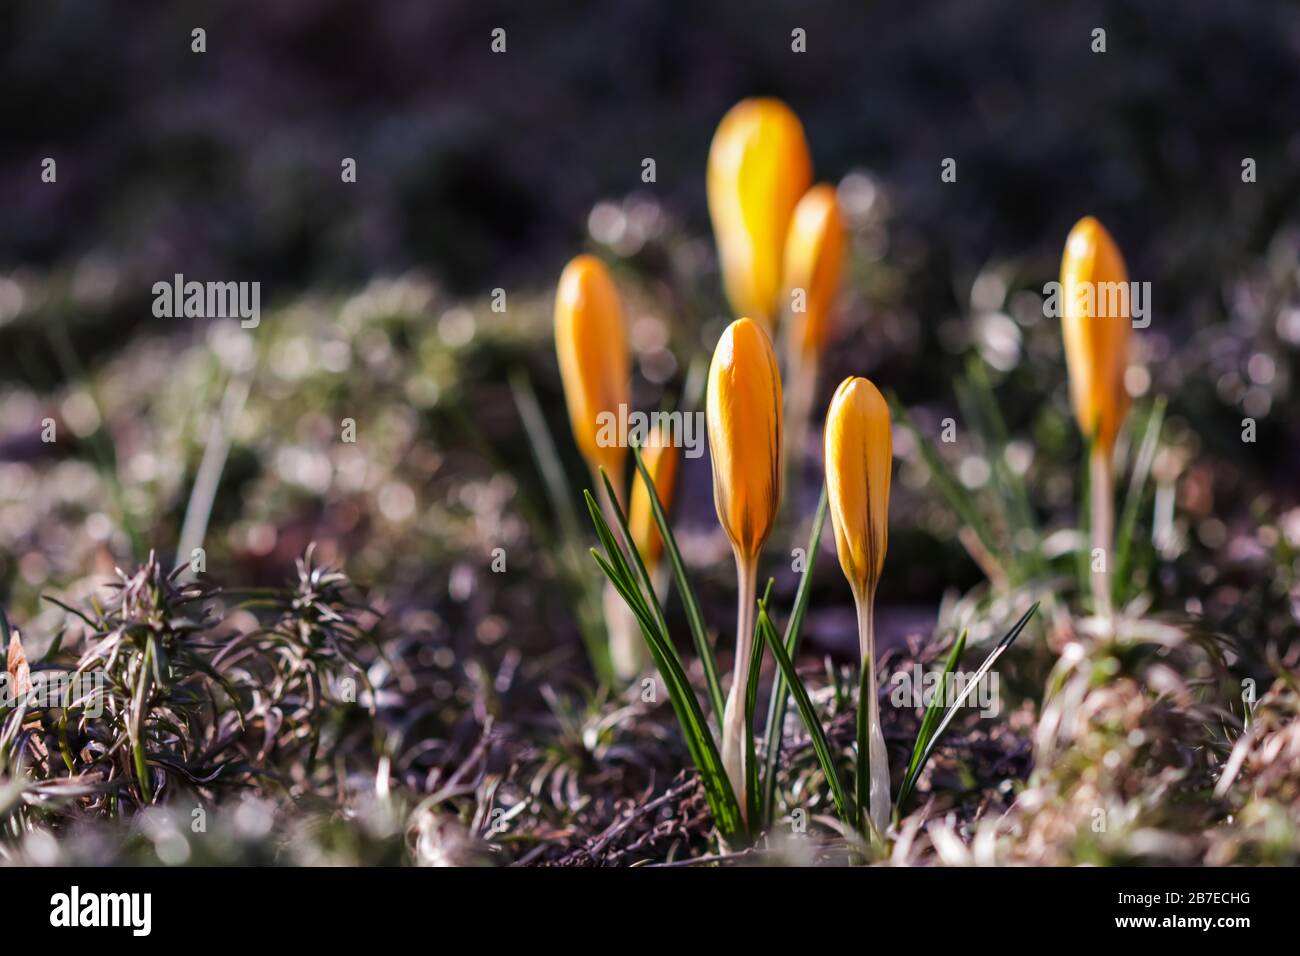 The first yellow crocuses in the spring garden. Botanical concept Stock Photo